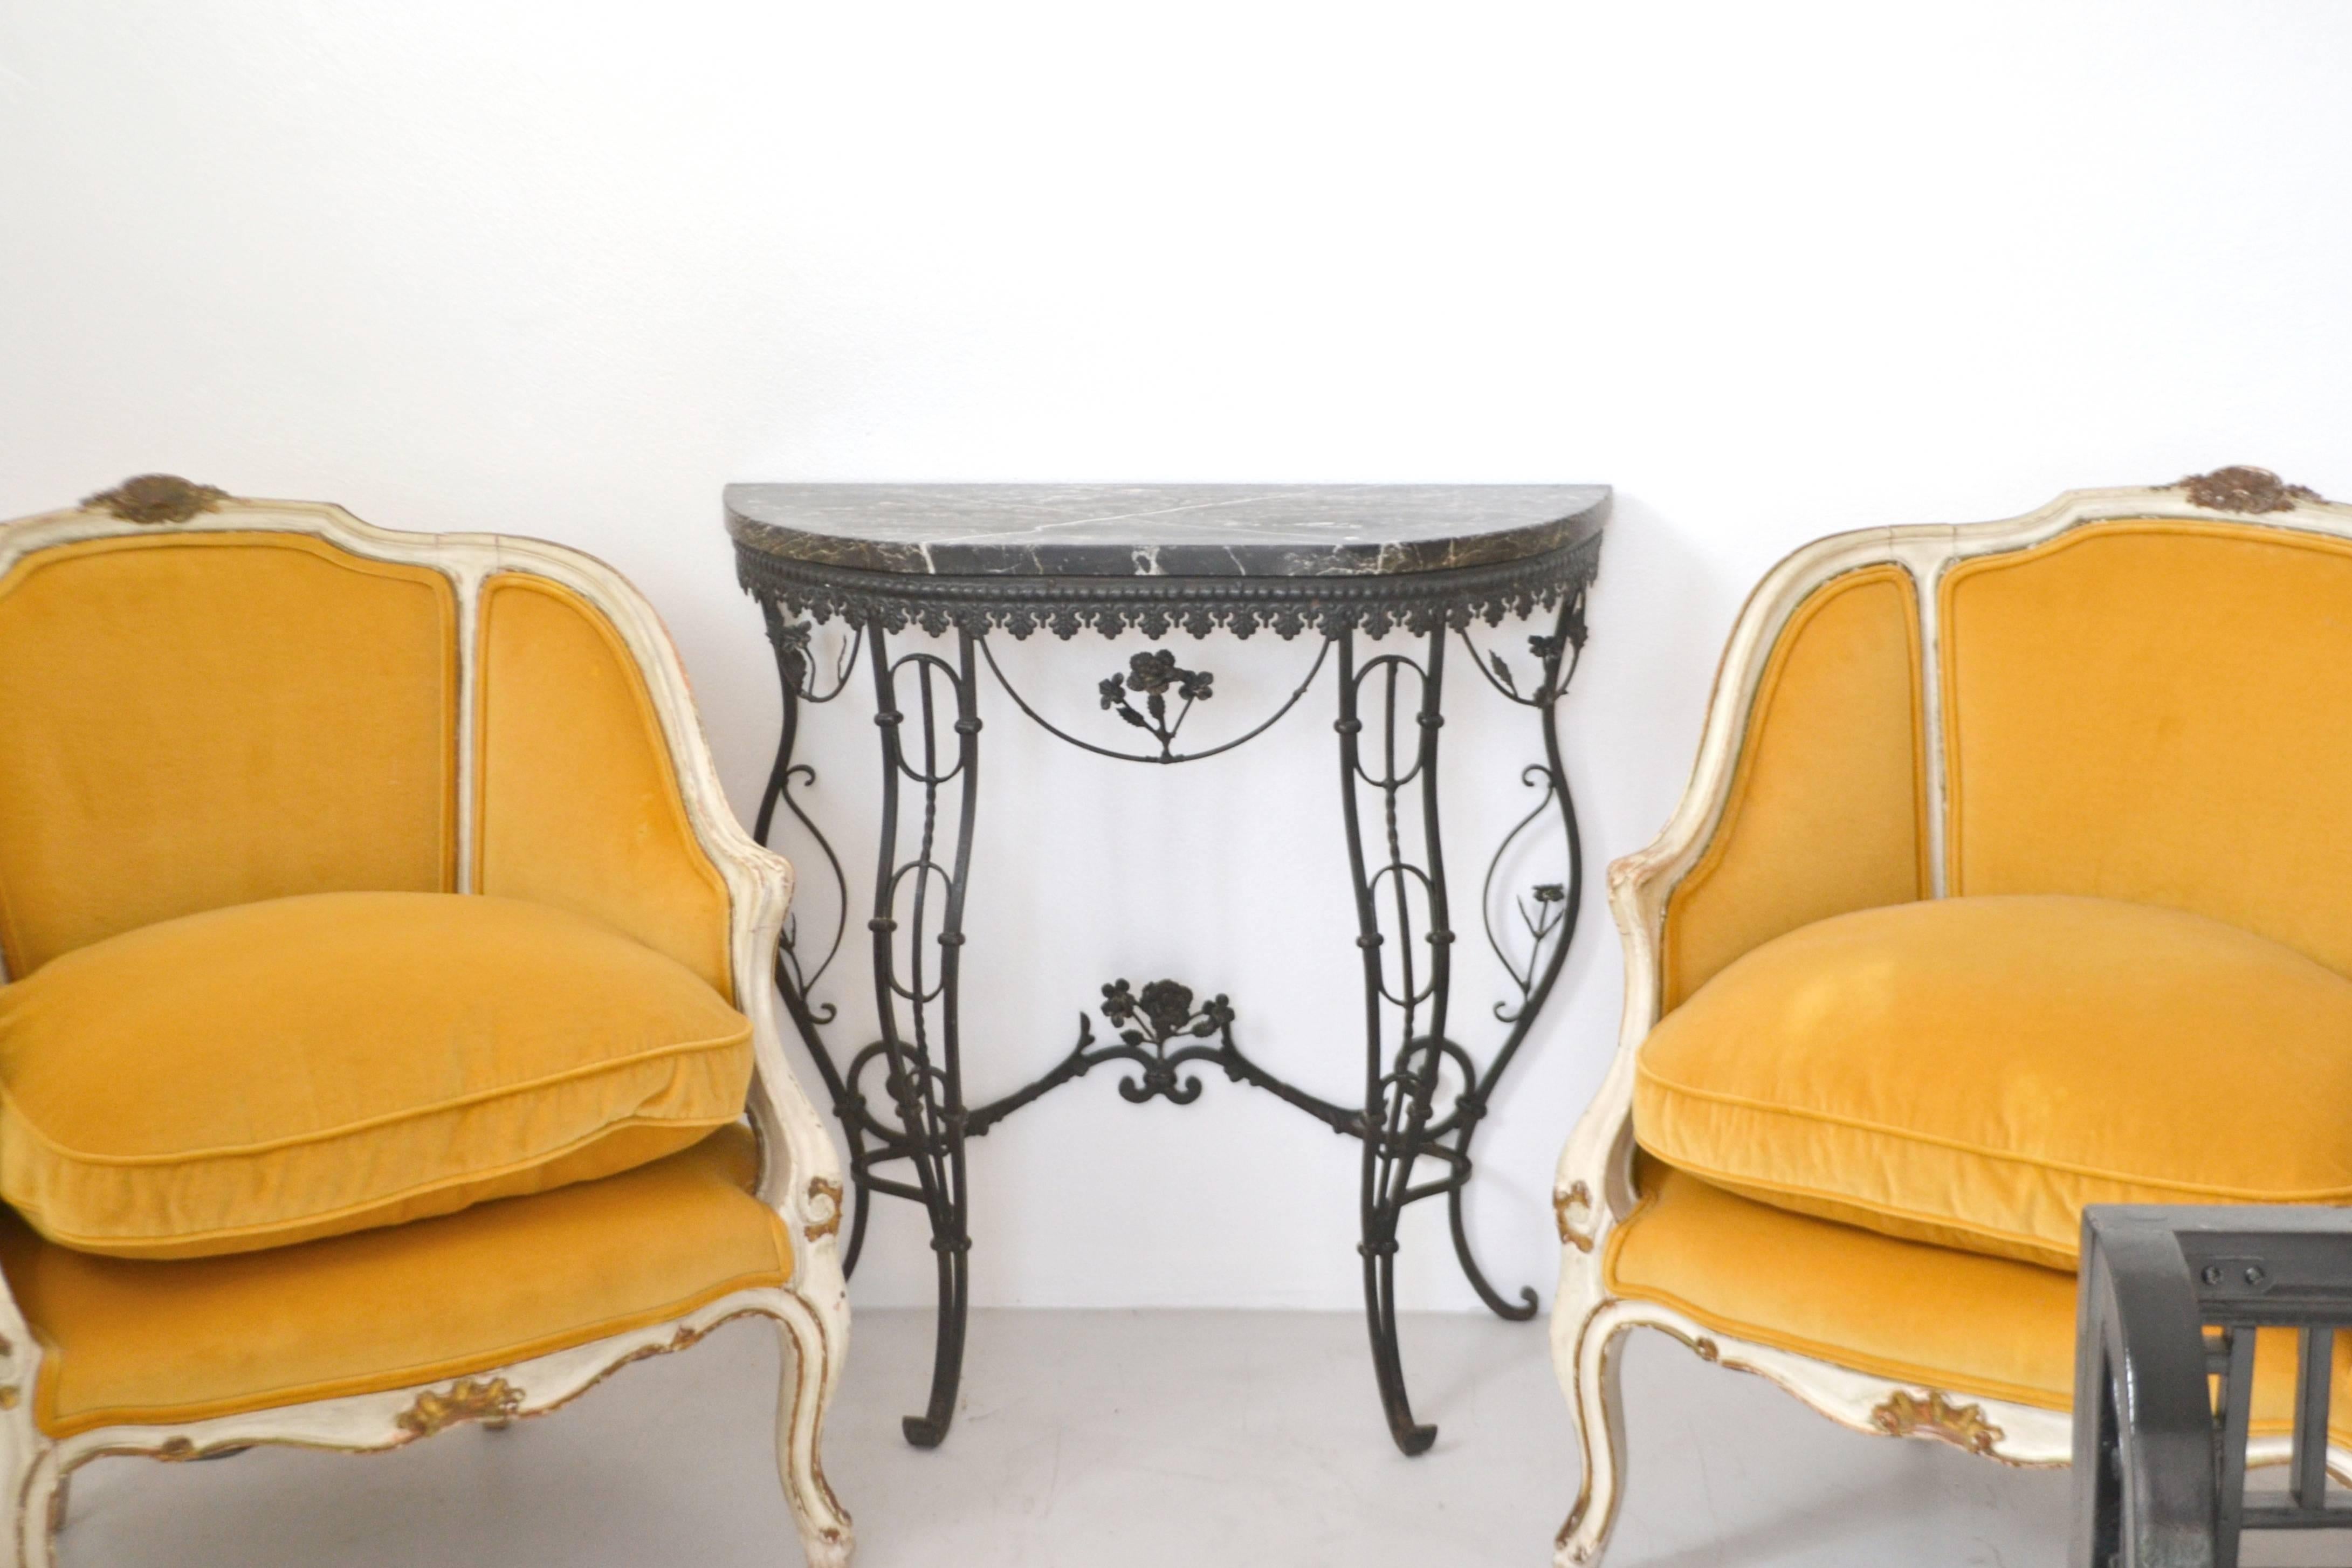 Stunning Hollywood Regency style Italian demilune console table, circa 1950s. This striking artisan crafted hall table is designed of blackened wrought iron with a marble top.